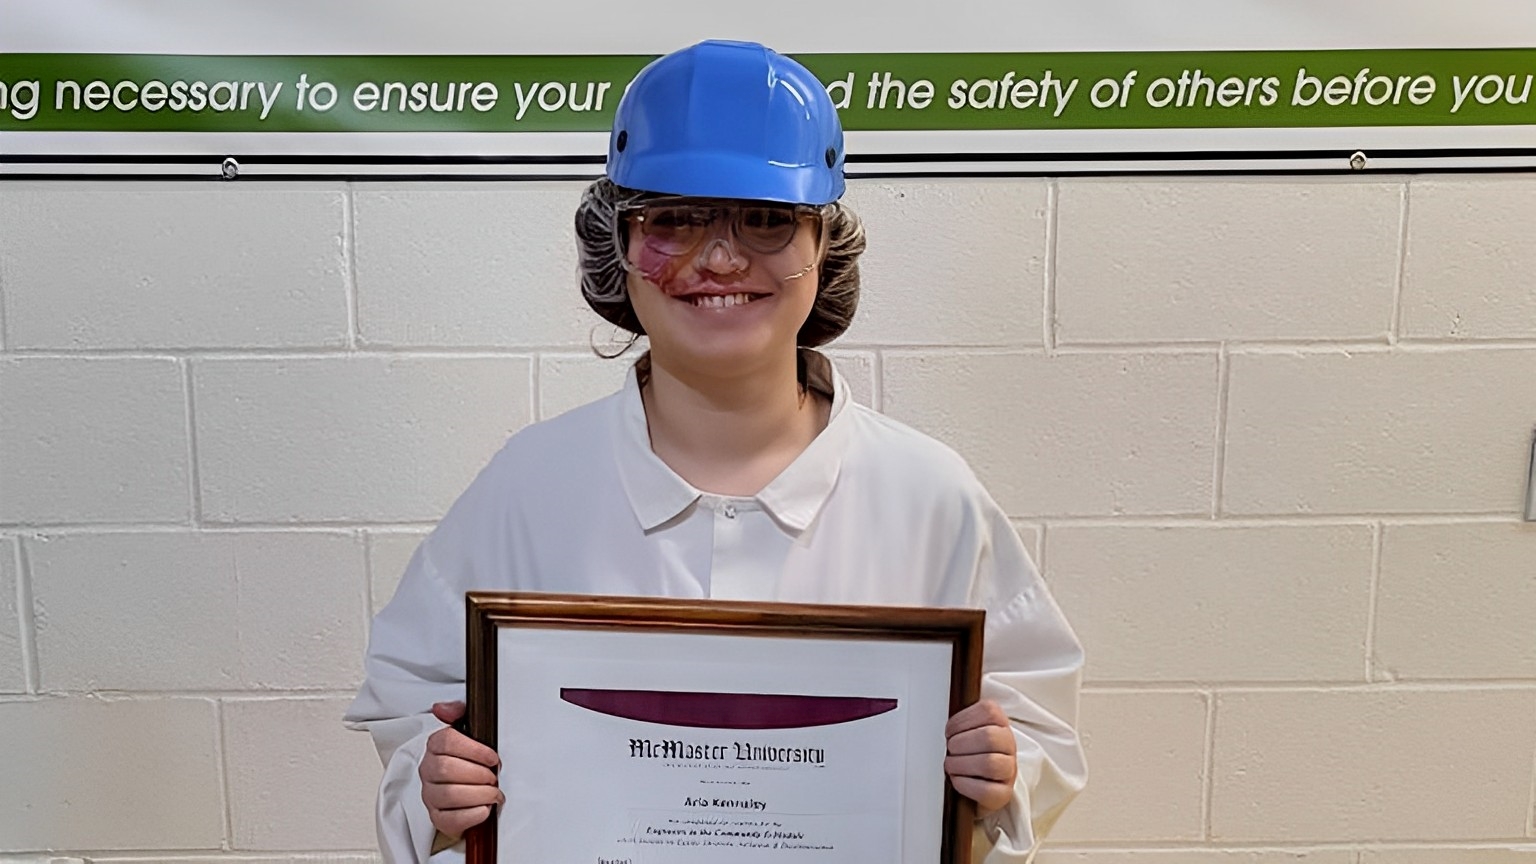 person at work wearing a hard hat and holding up a framed certificate.